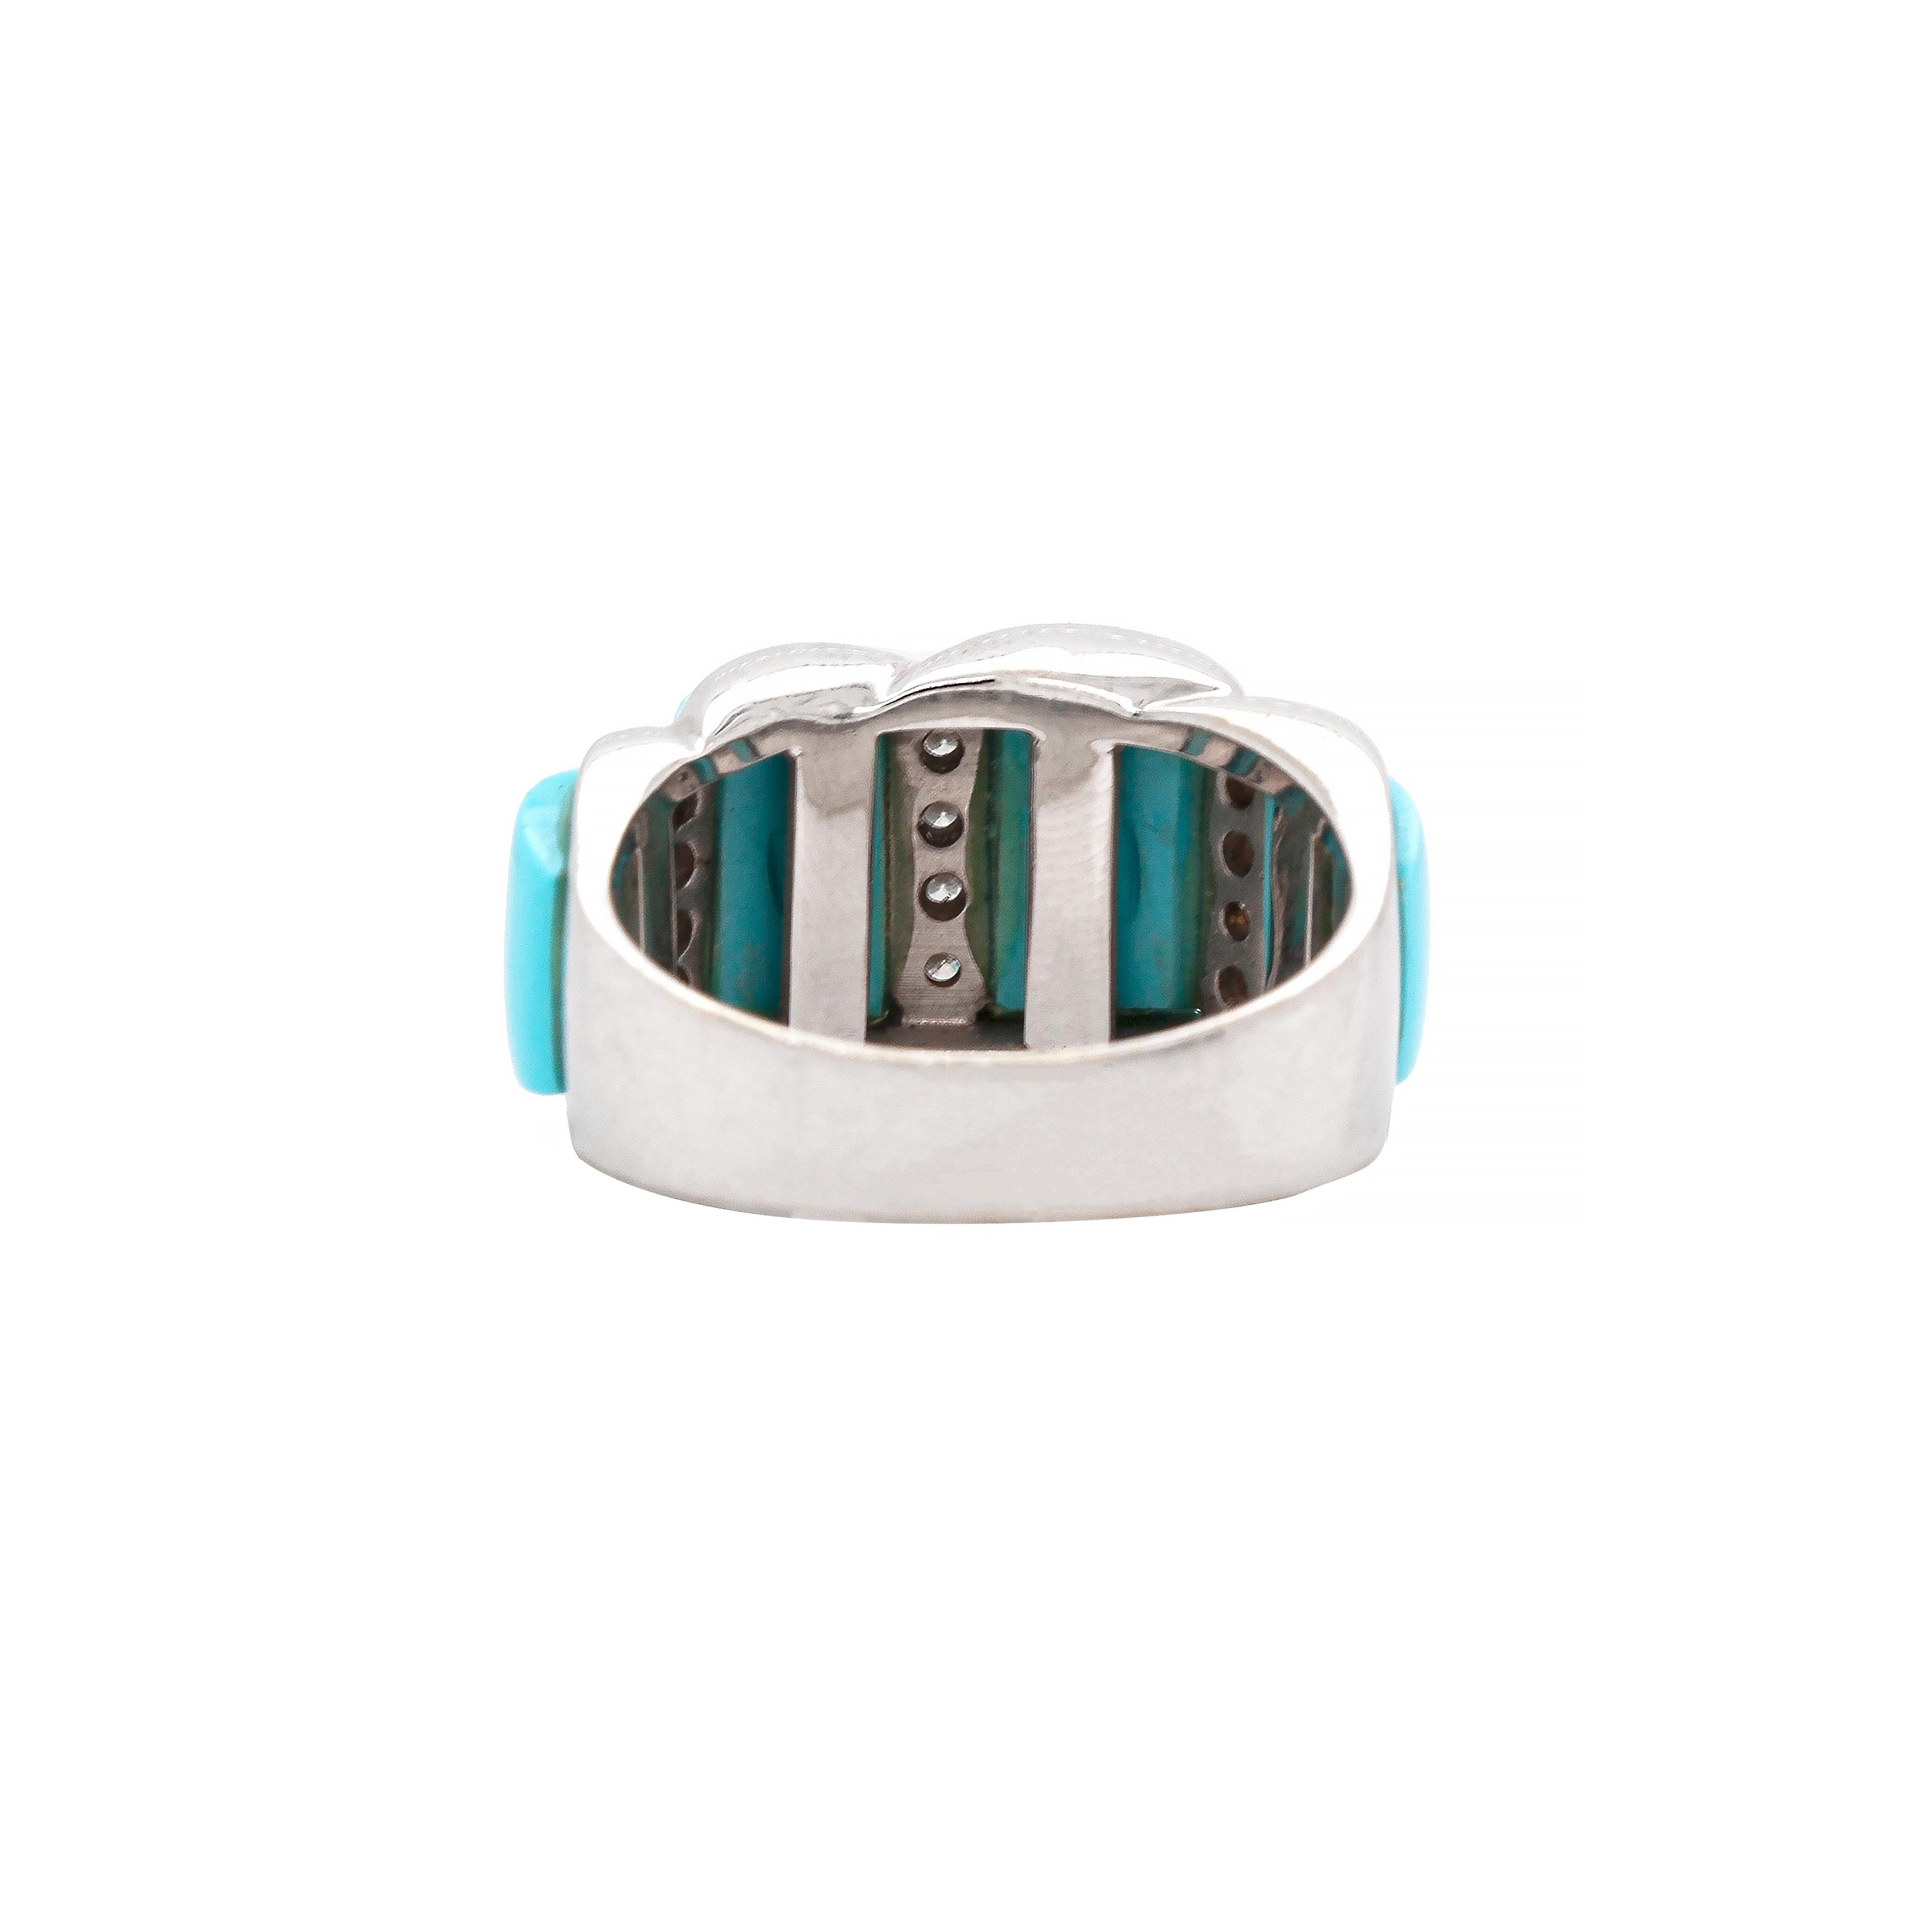 This wonderful cocktail ring features 4 rectangular cabouchon turquoise in a rich even sky blue colour, variating in sizes.
The cabouchons are separated by 3 rows of 4 fine quality round brilliant cut diamonds each, with a total approximate combined